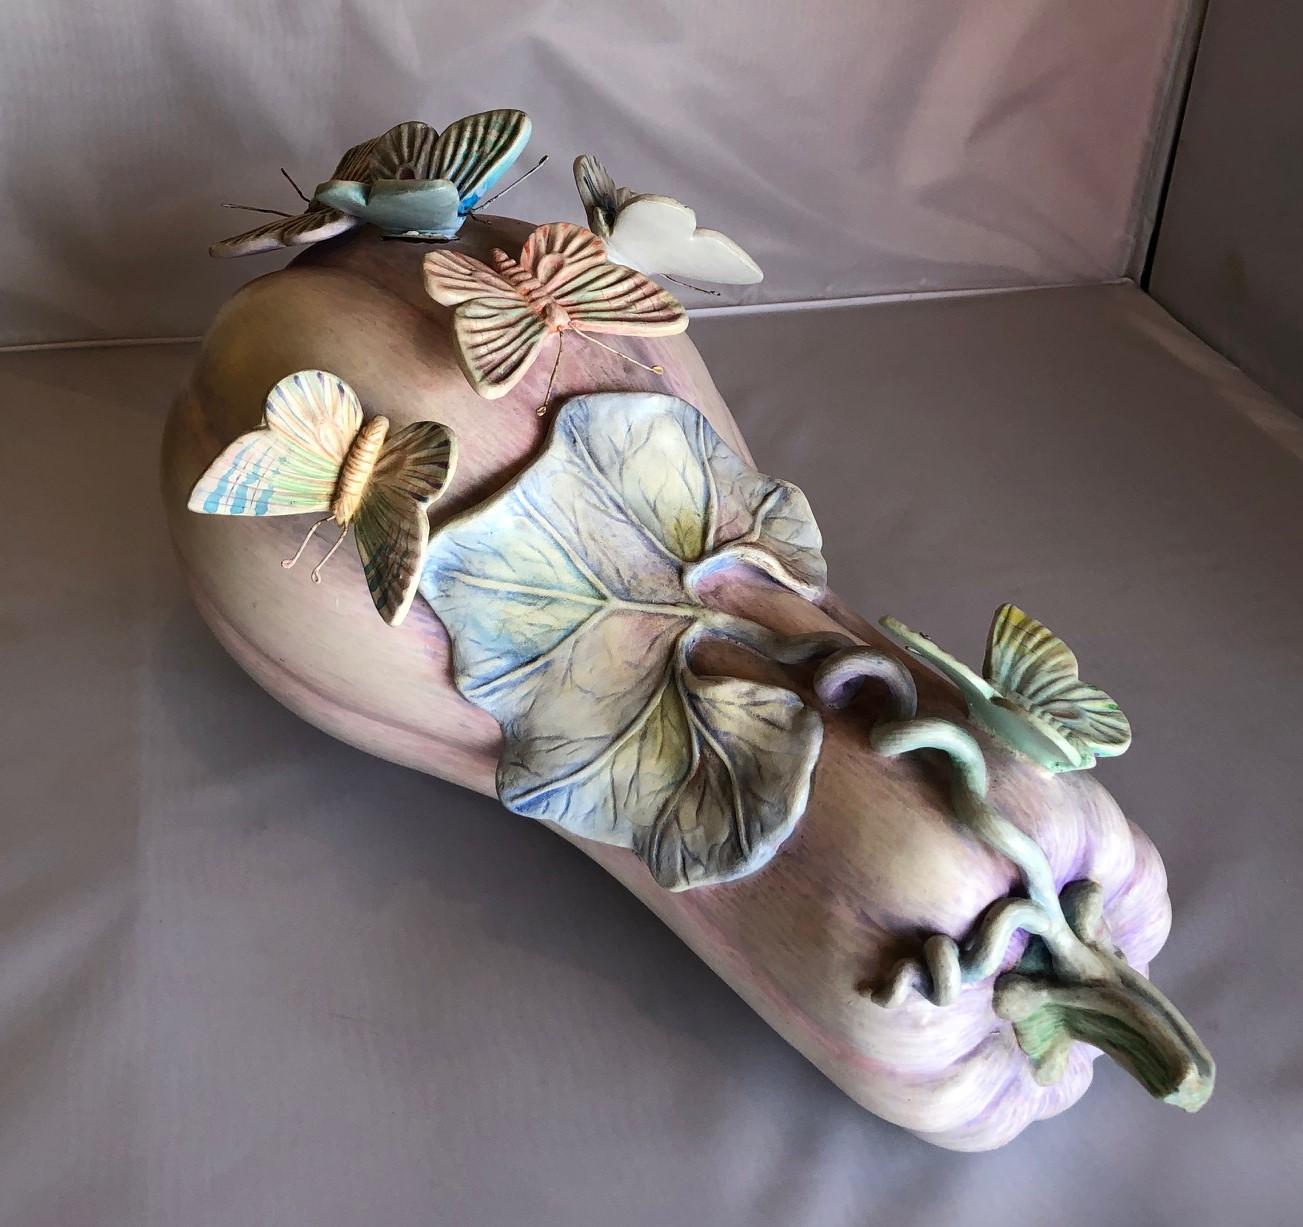 Mexican Whimsical Ceramic Butterflies on Squash Sculpture by Sergio Bustamante